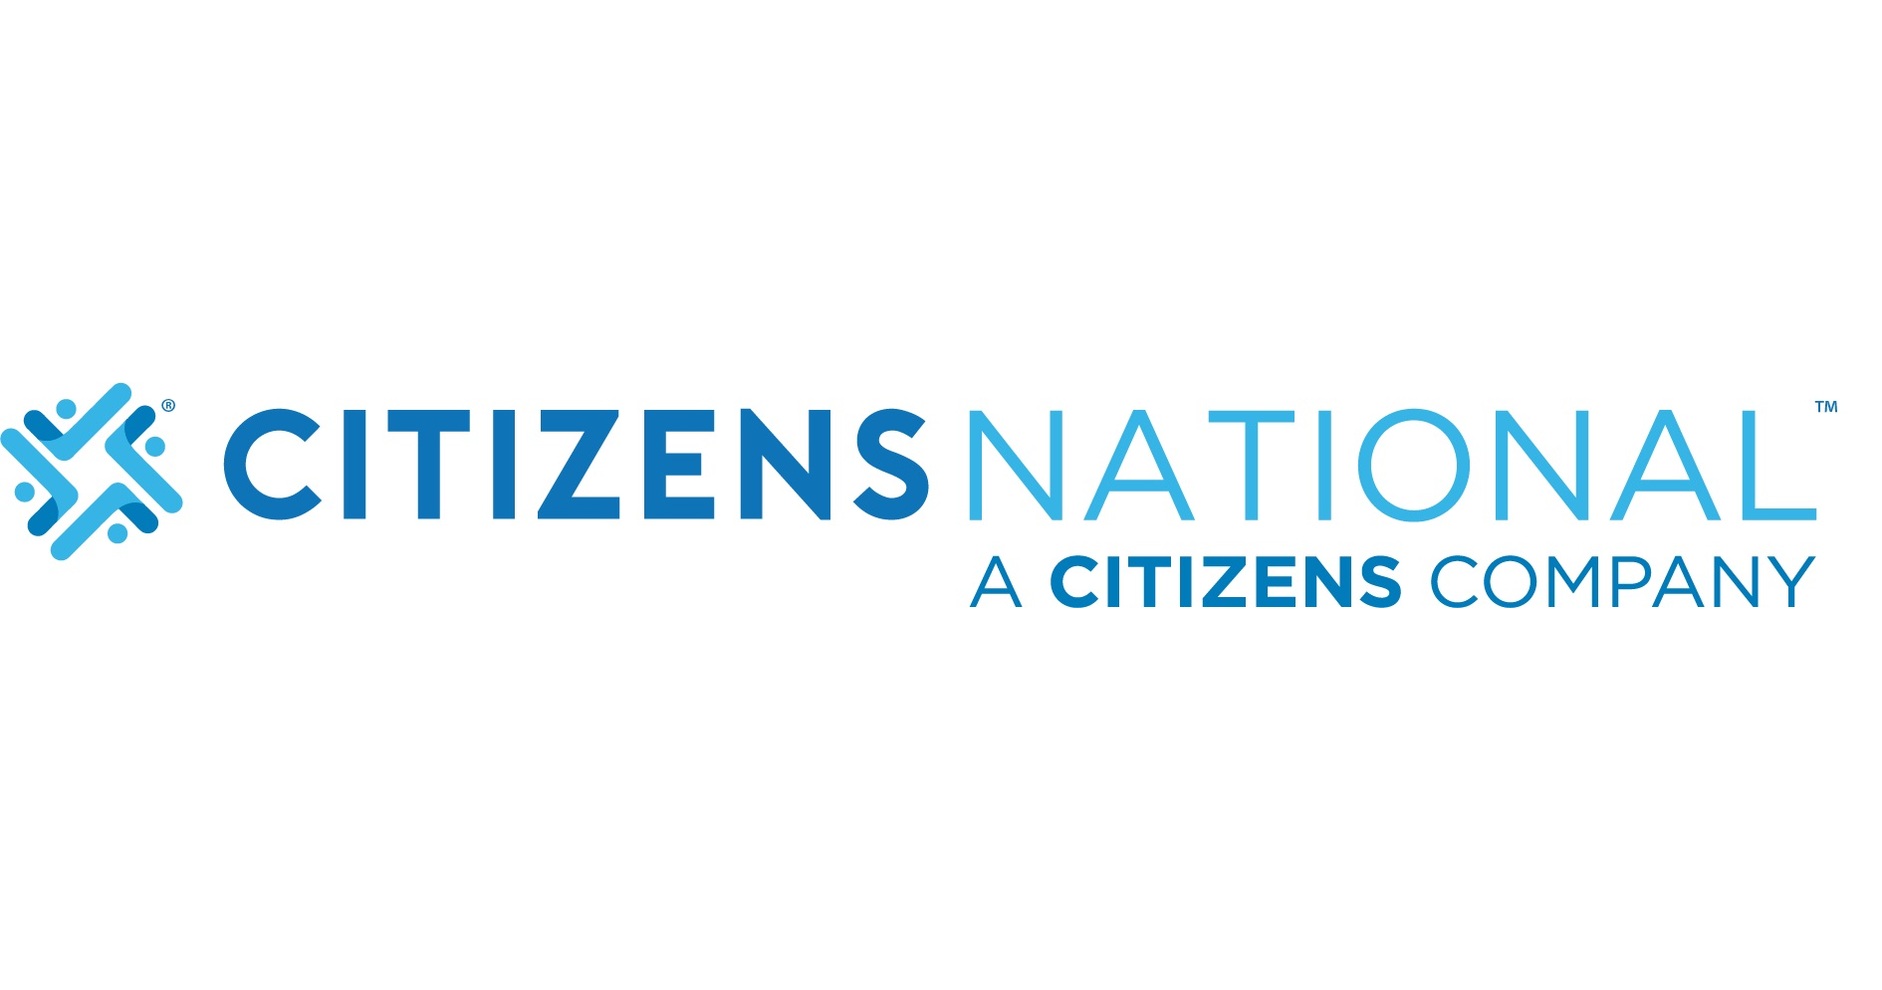 CITIZENS NATIONAL EXPANDS CRITICAL ILLNESS PRODUCT TO TEXAS